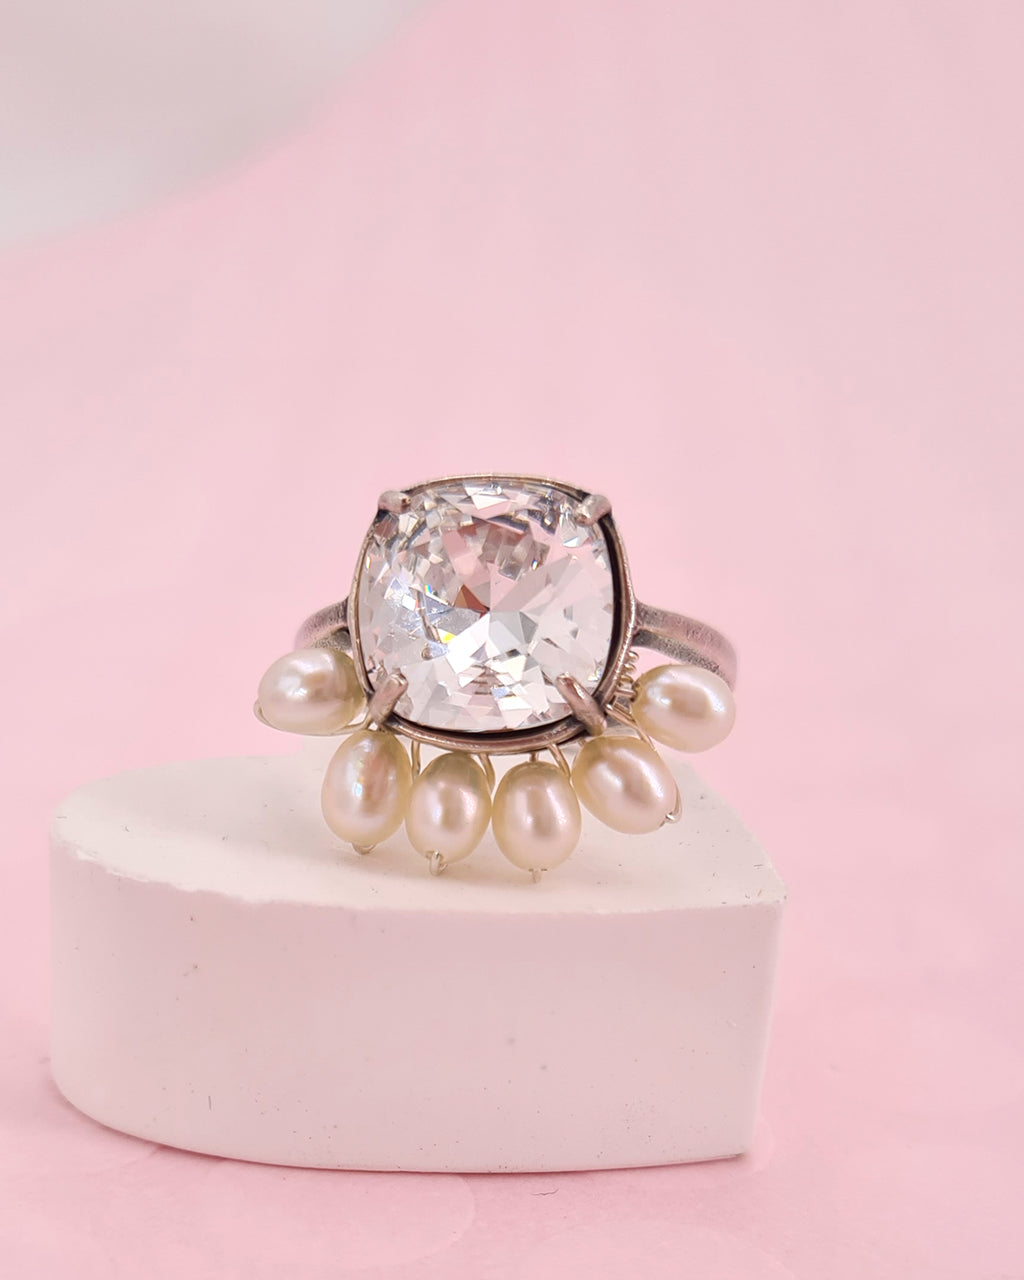 Pearl Cocktail Adjustable Ring with White Cushion Cut Crystal | Boho Vintage Bridal Shower Gifts